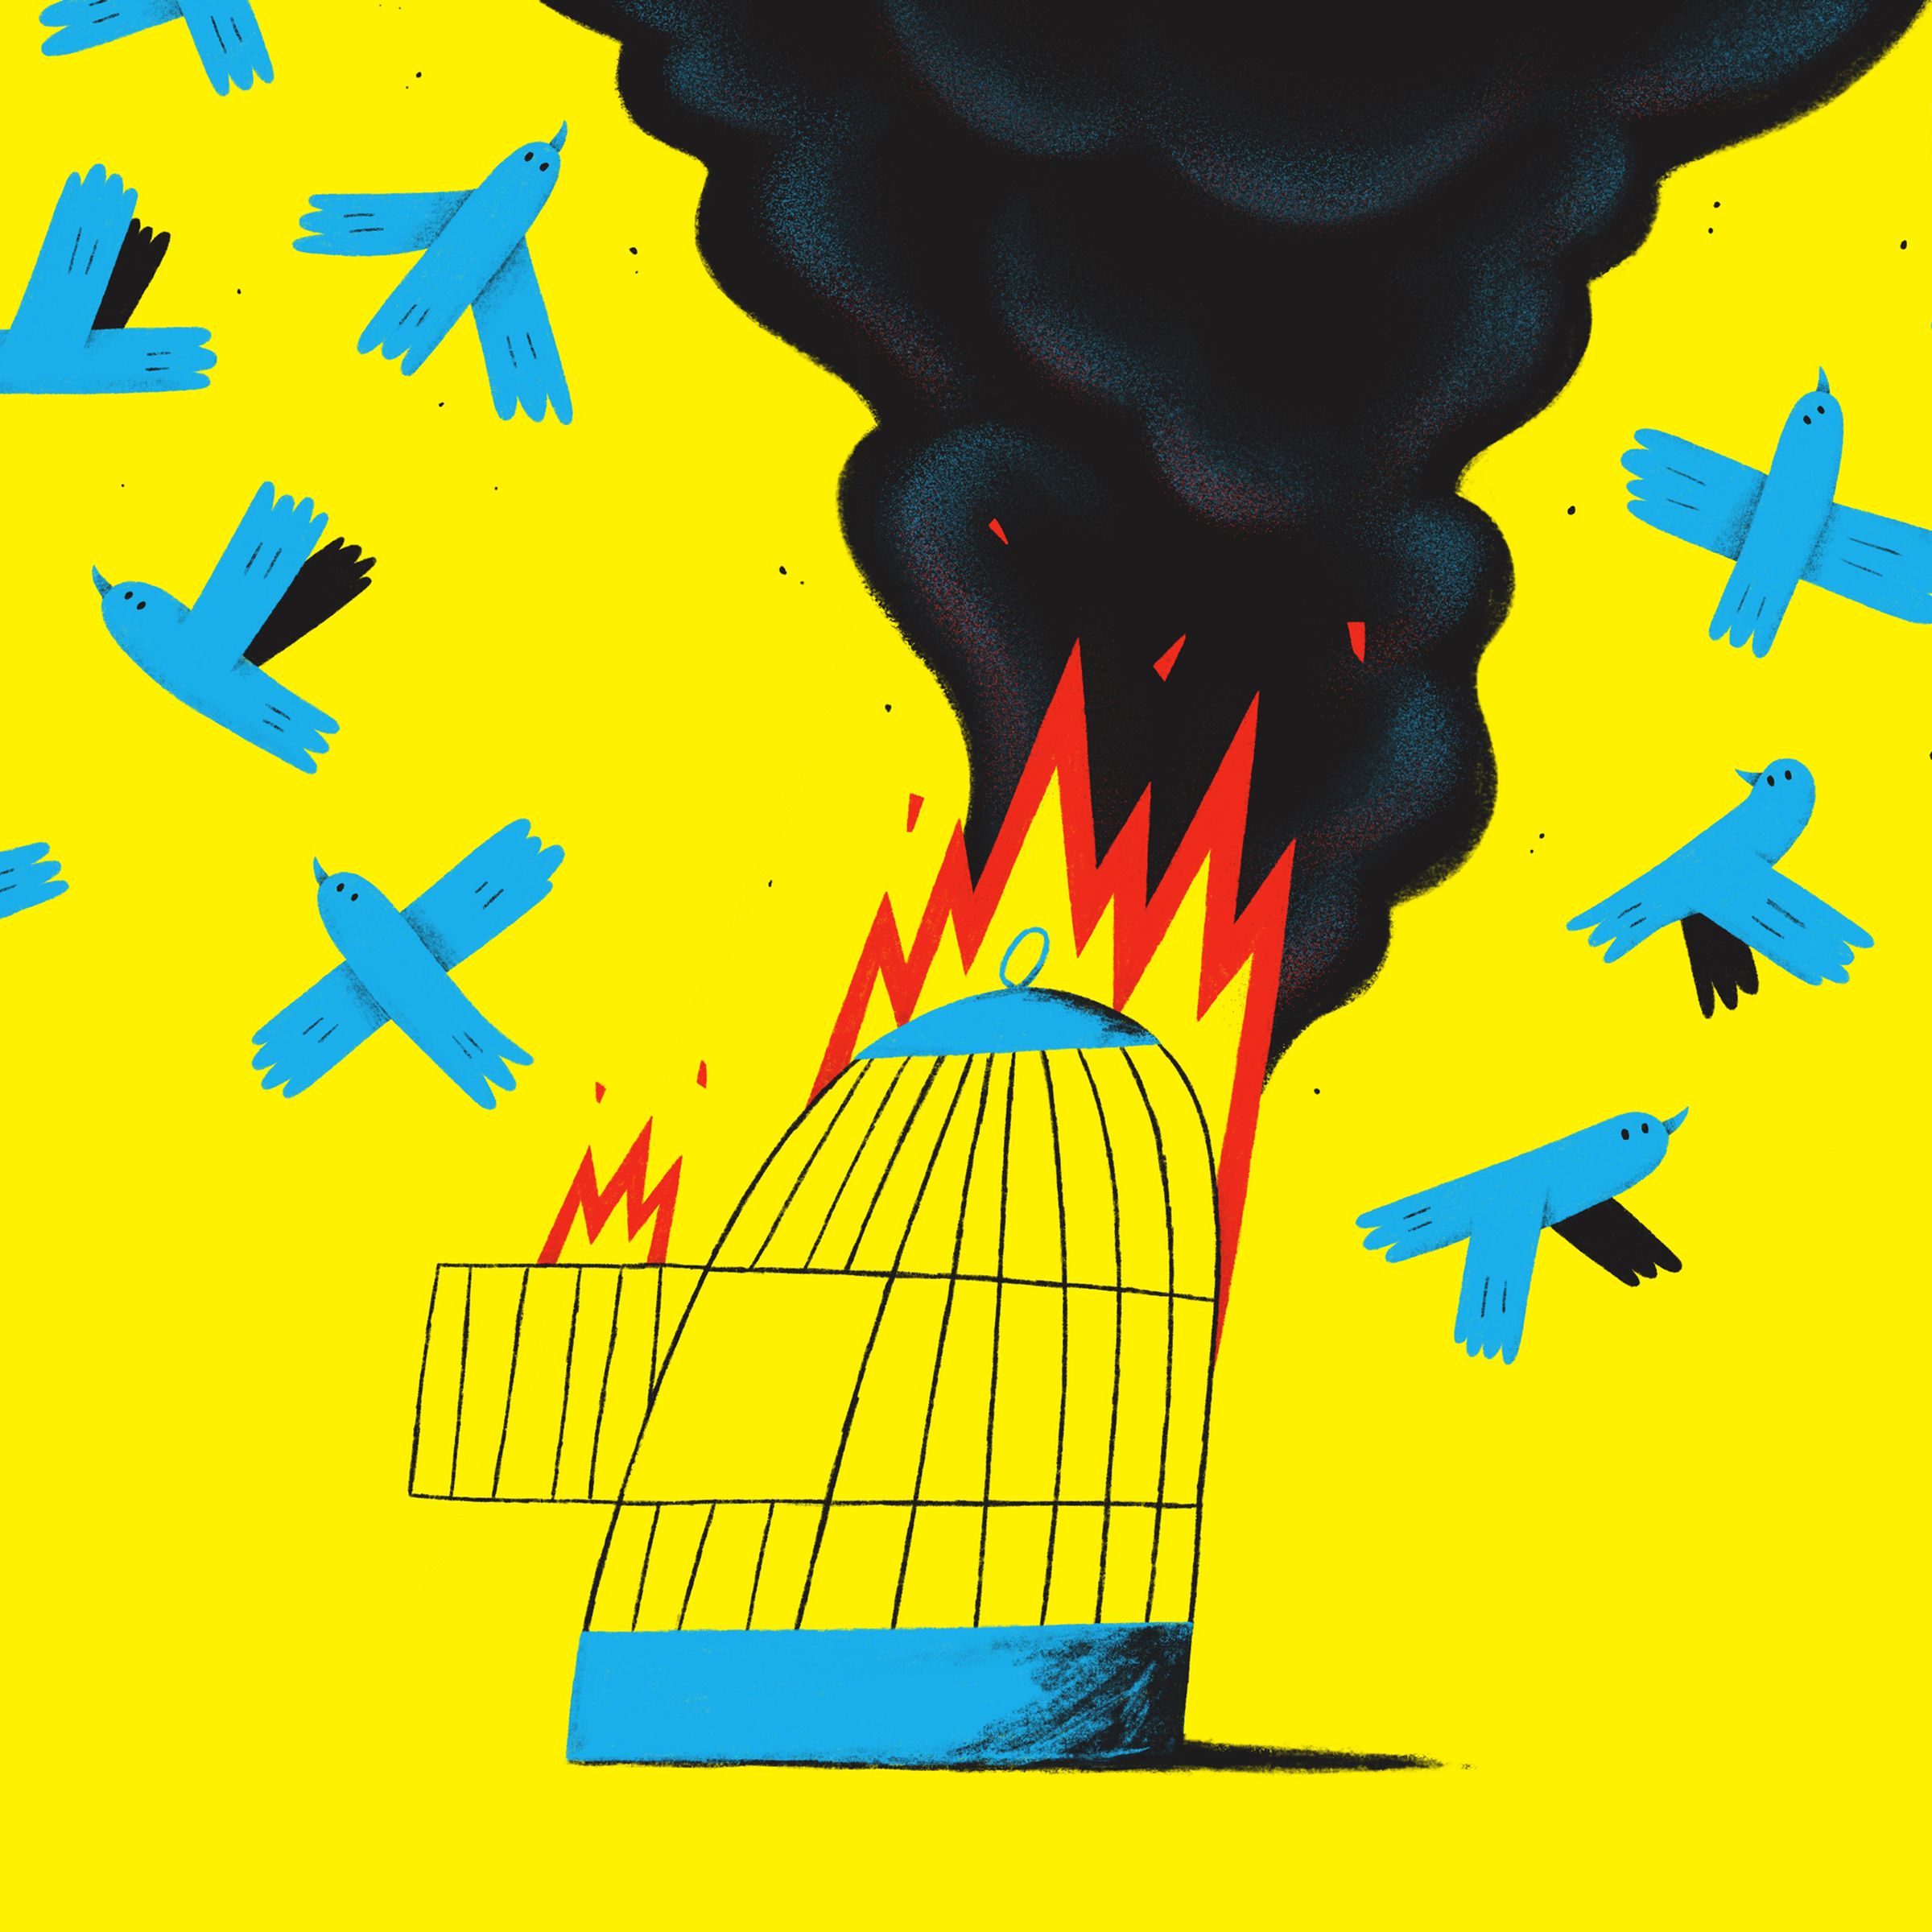 An image of a birdcage on fire